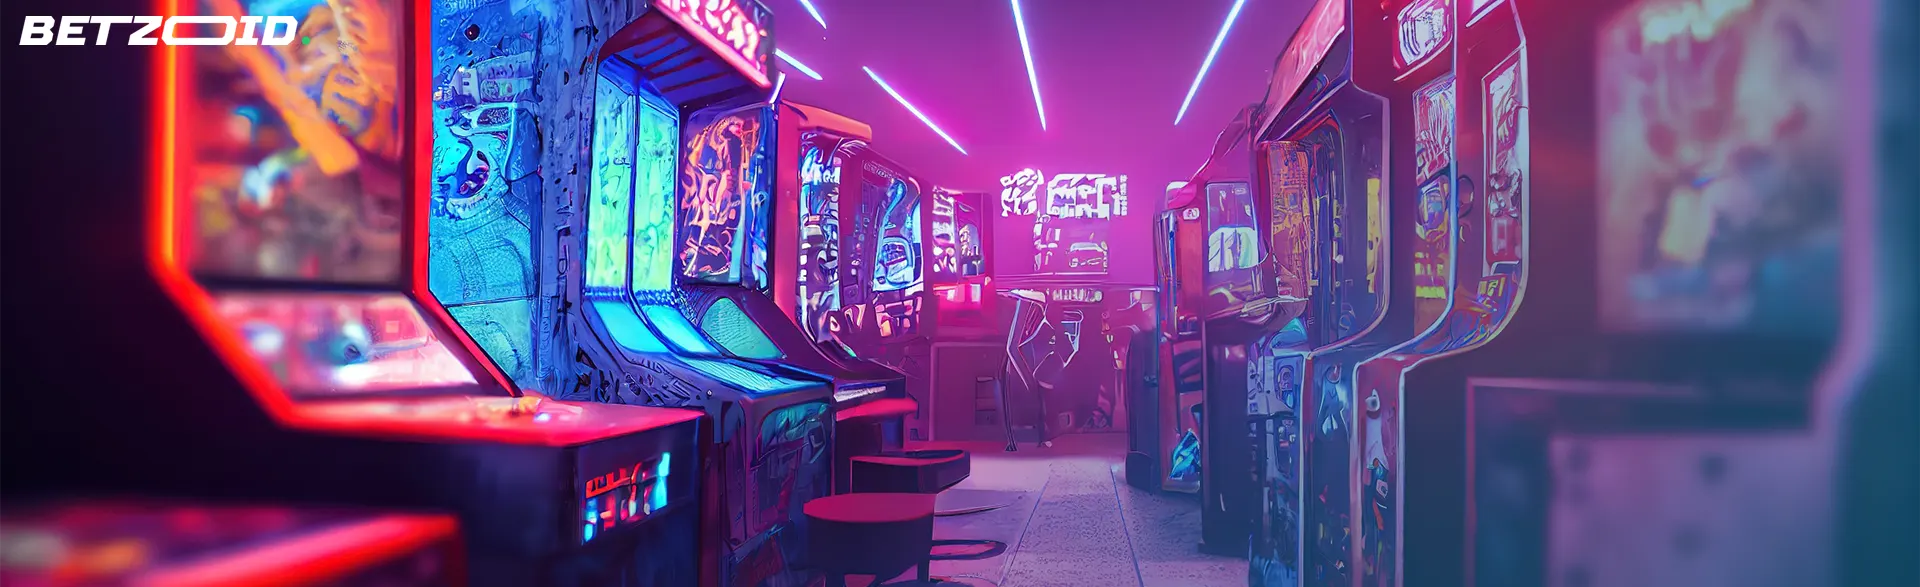 Neon-lit arcade-style casino machines for online casinos without verification in Canada.